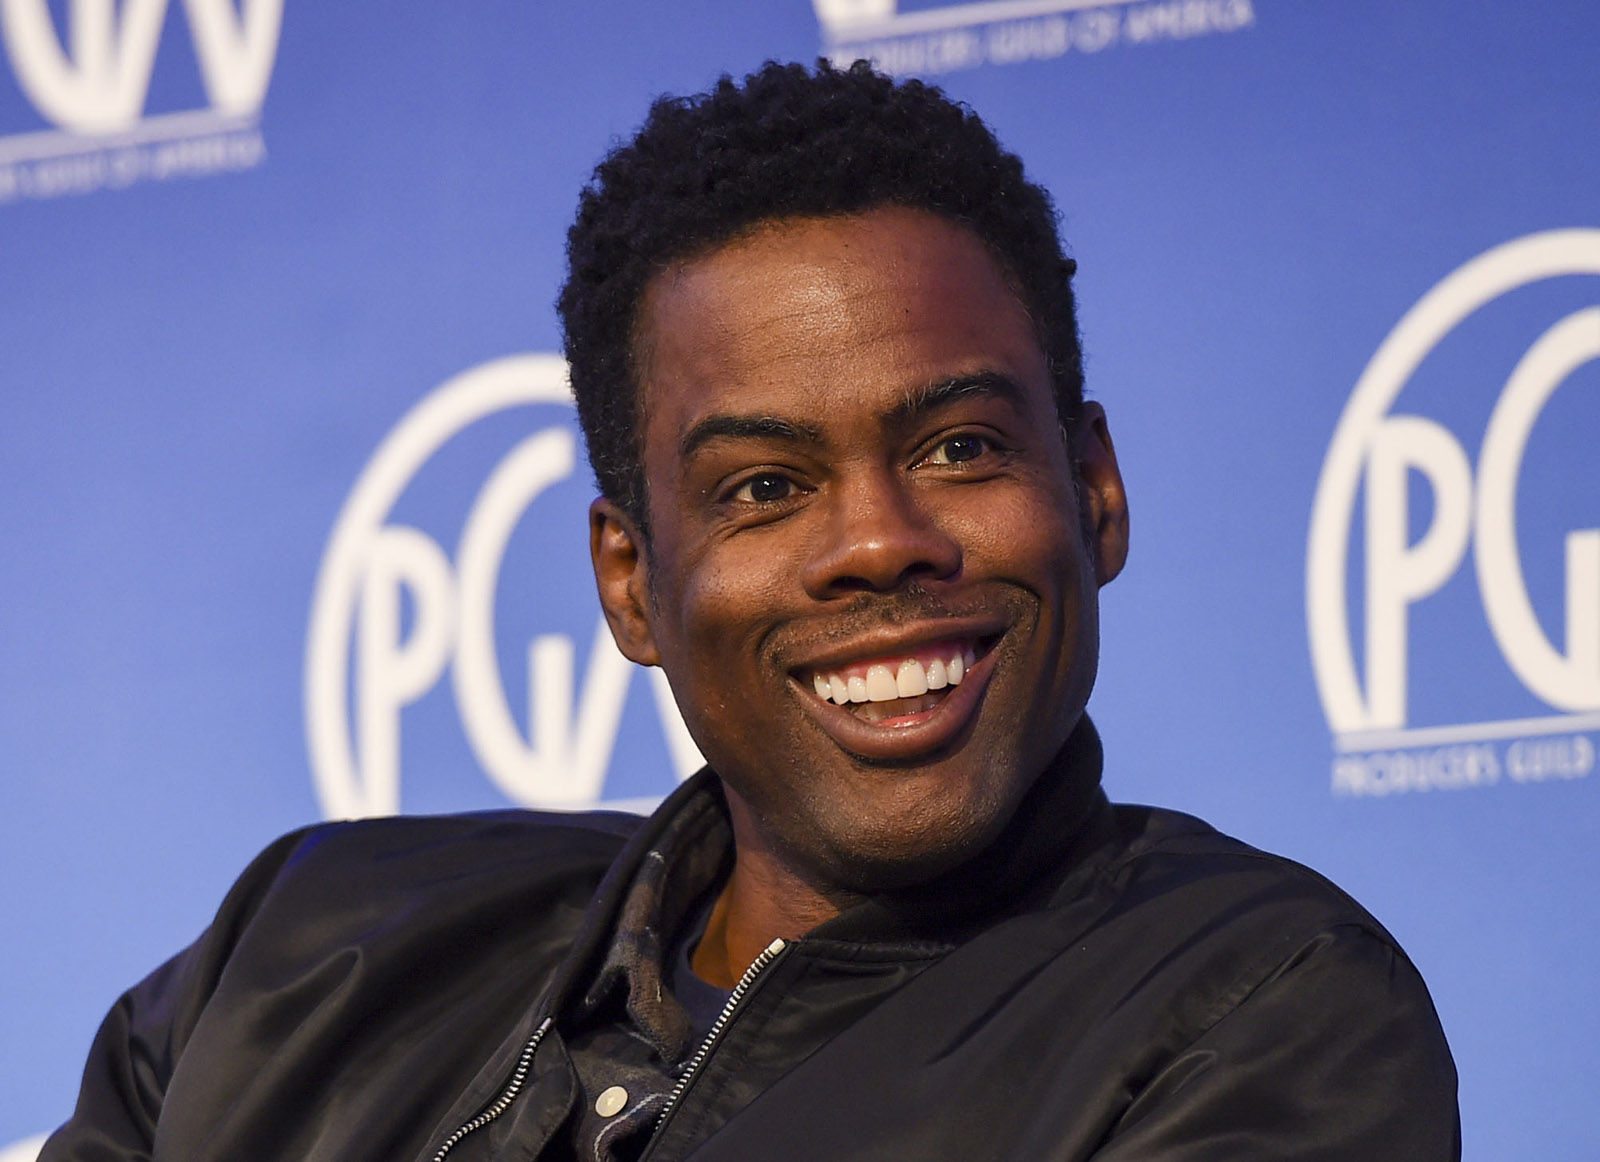 IMAGE DISTRIBUTED FOR PRODUCER'S GUILD OF AMERICA FOUNDATION - Chris Rock at Produced By: New York 2016 at the Time Warner Center on Saturday, October 29th, 2016, in New York City, NY. (Photo by Scott Roth/Invision for Producer's Guild of America Foundation/AP Images)